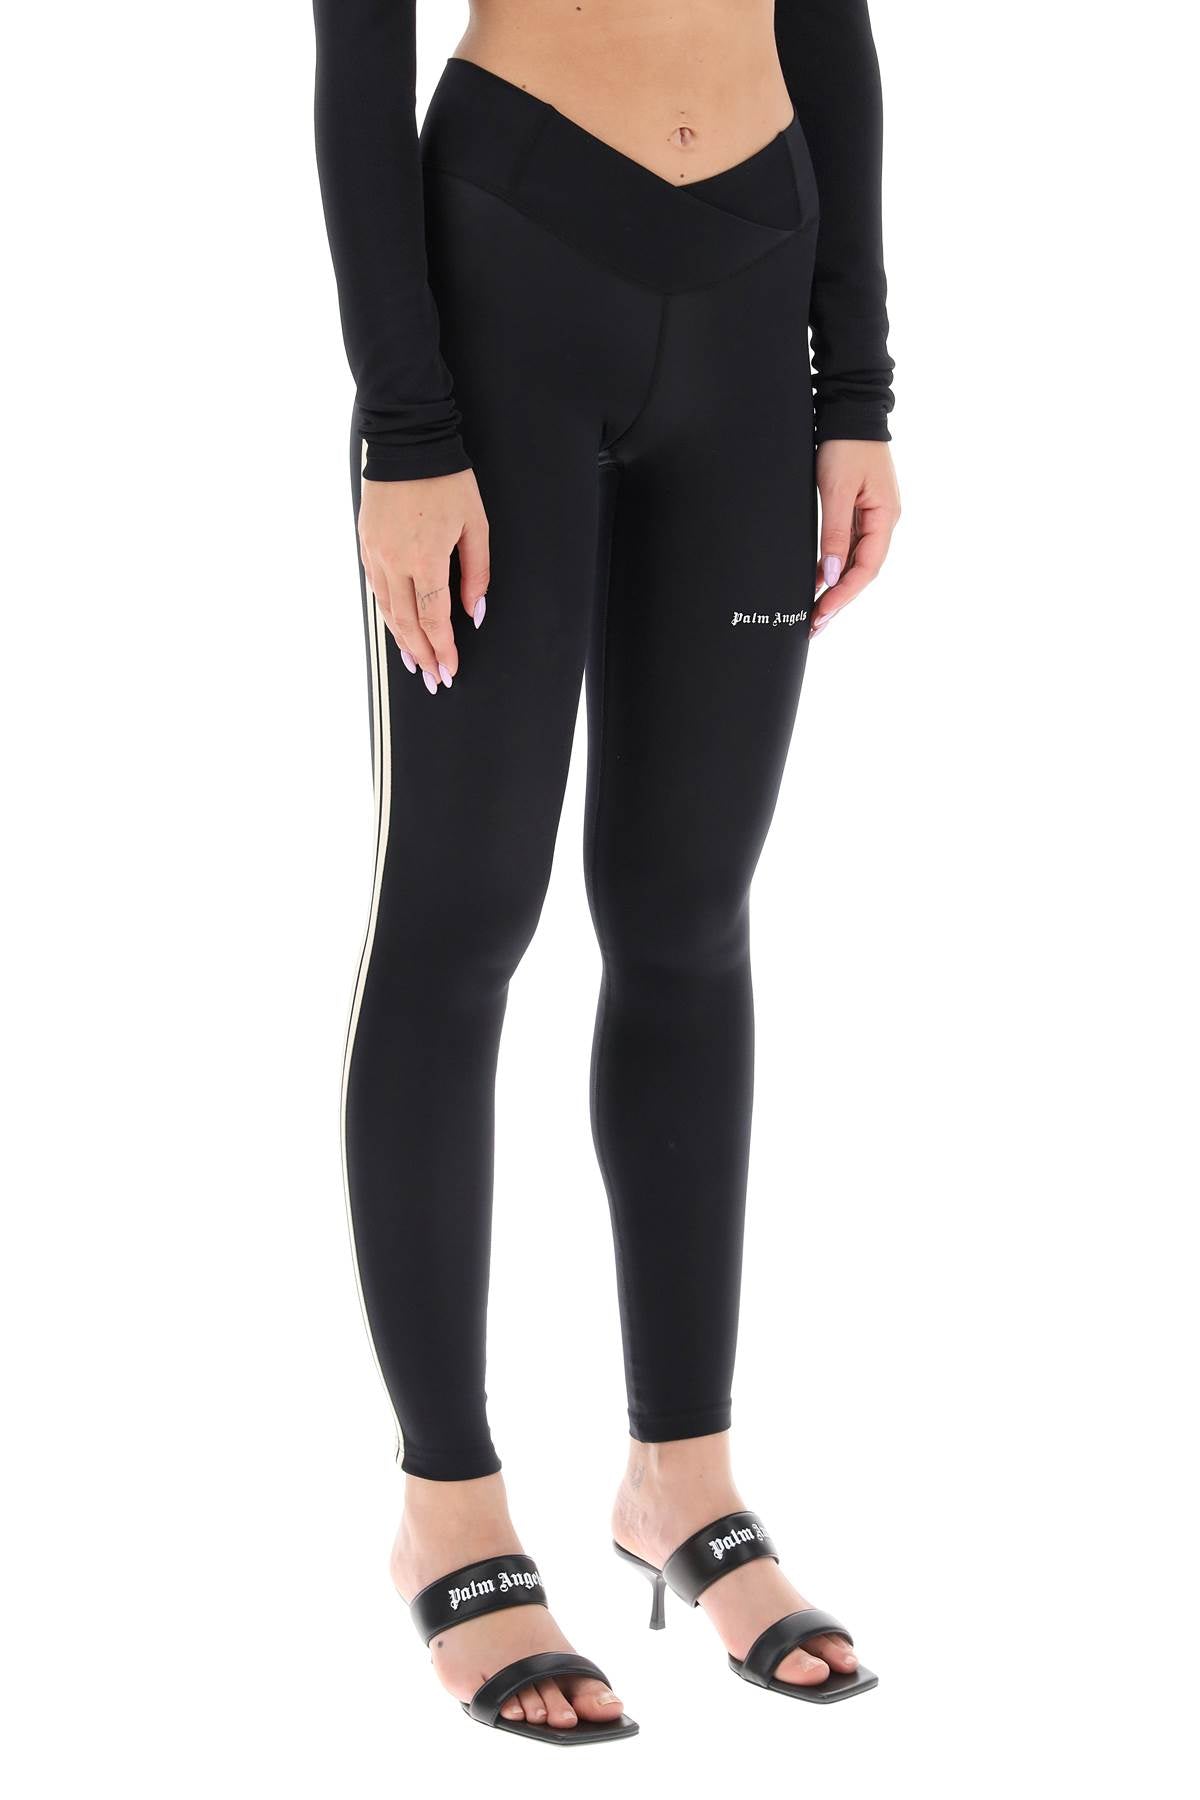 Palm angels leggings with contrasting side bands-1